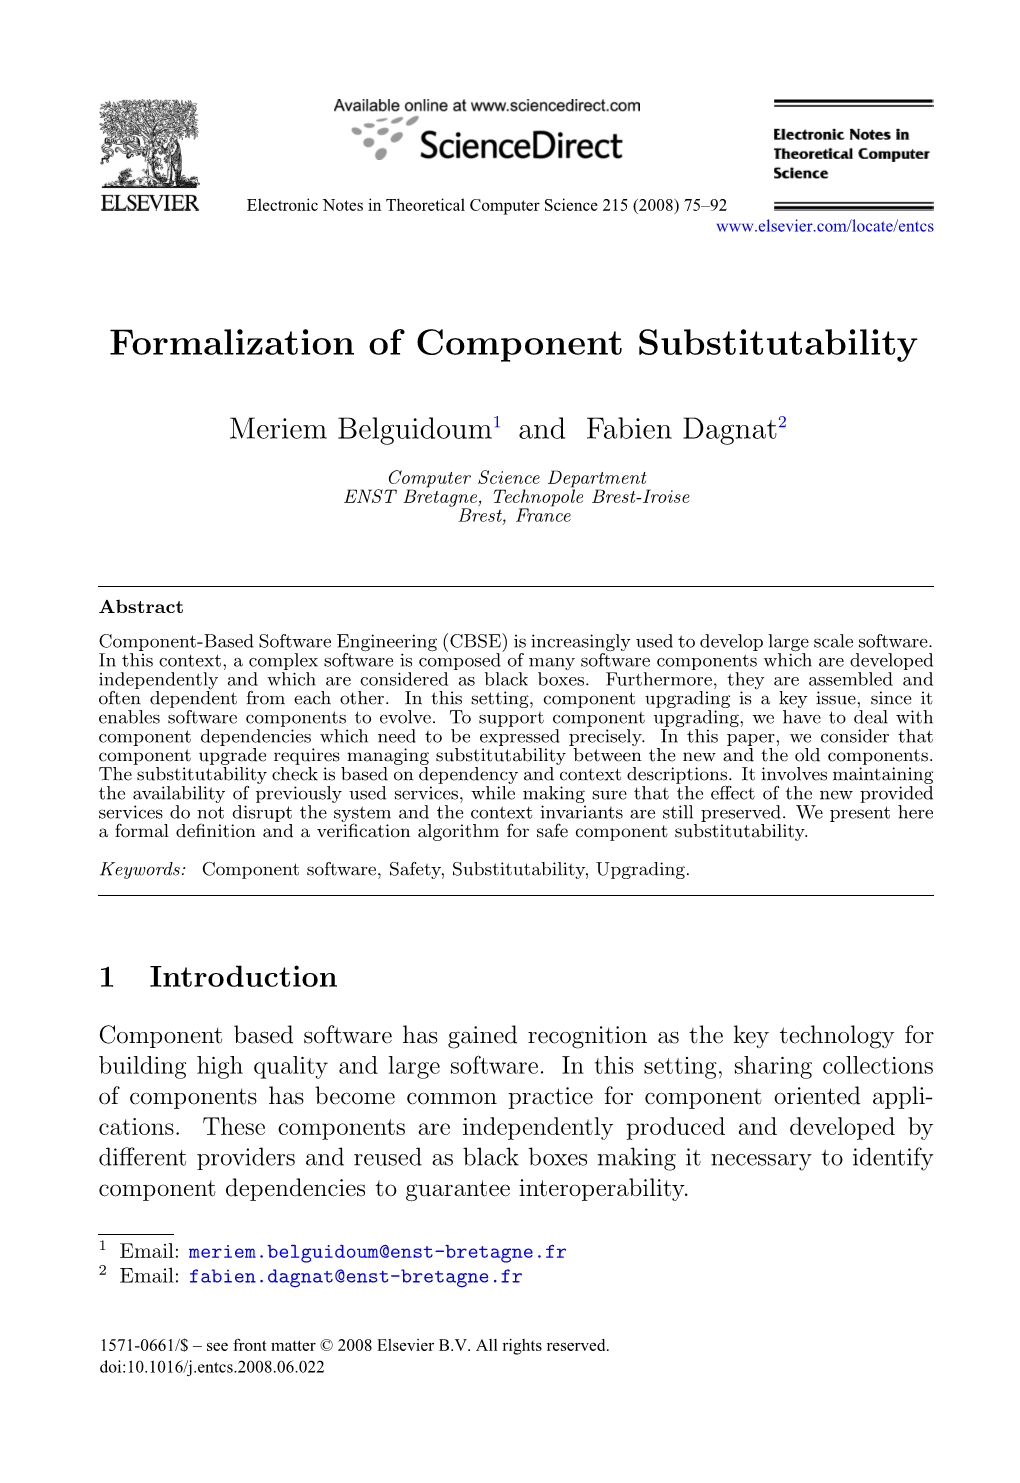 Formalization of Component Substitutability